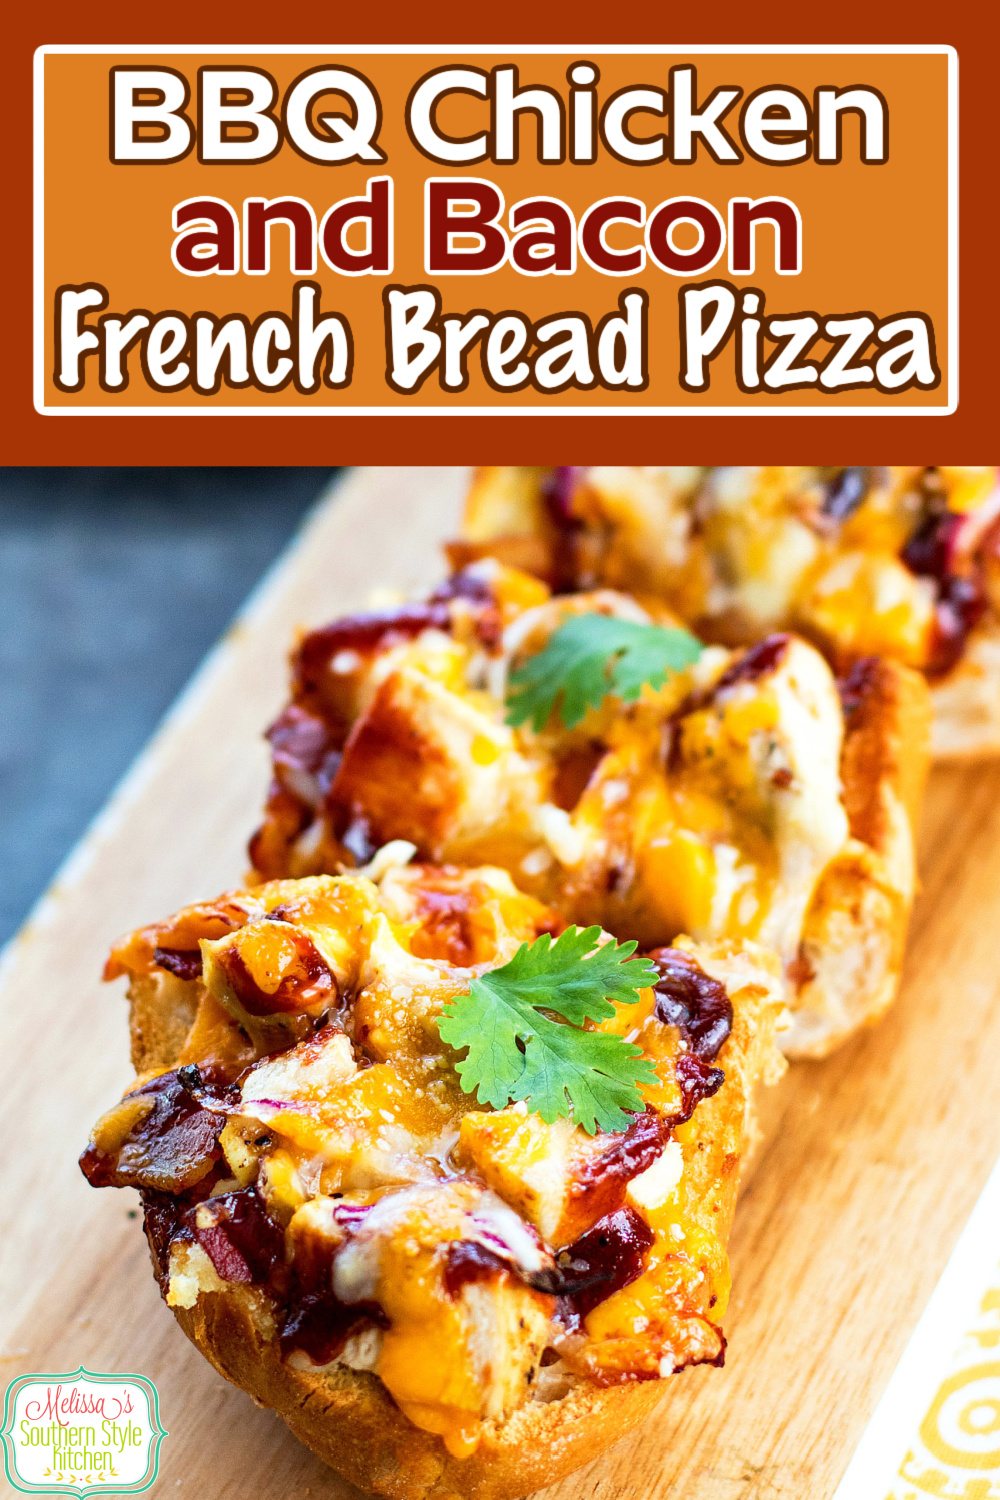 Barbecue Chicken and Bacon French Bread is a 20 minute meal that won't break the bank #barbecuechicken #frenchbreadpizza #frenhcbread #bbq #bbqchicken #bacon #easyrecipes #dinner #dinnerideas #easychickenrecipes #southernfood #southernrecipes via @melissasssk